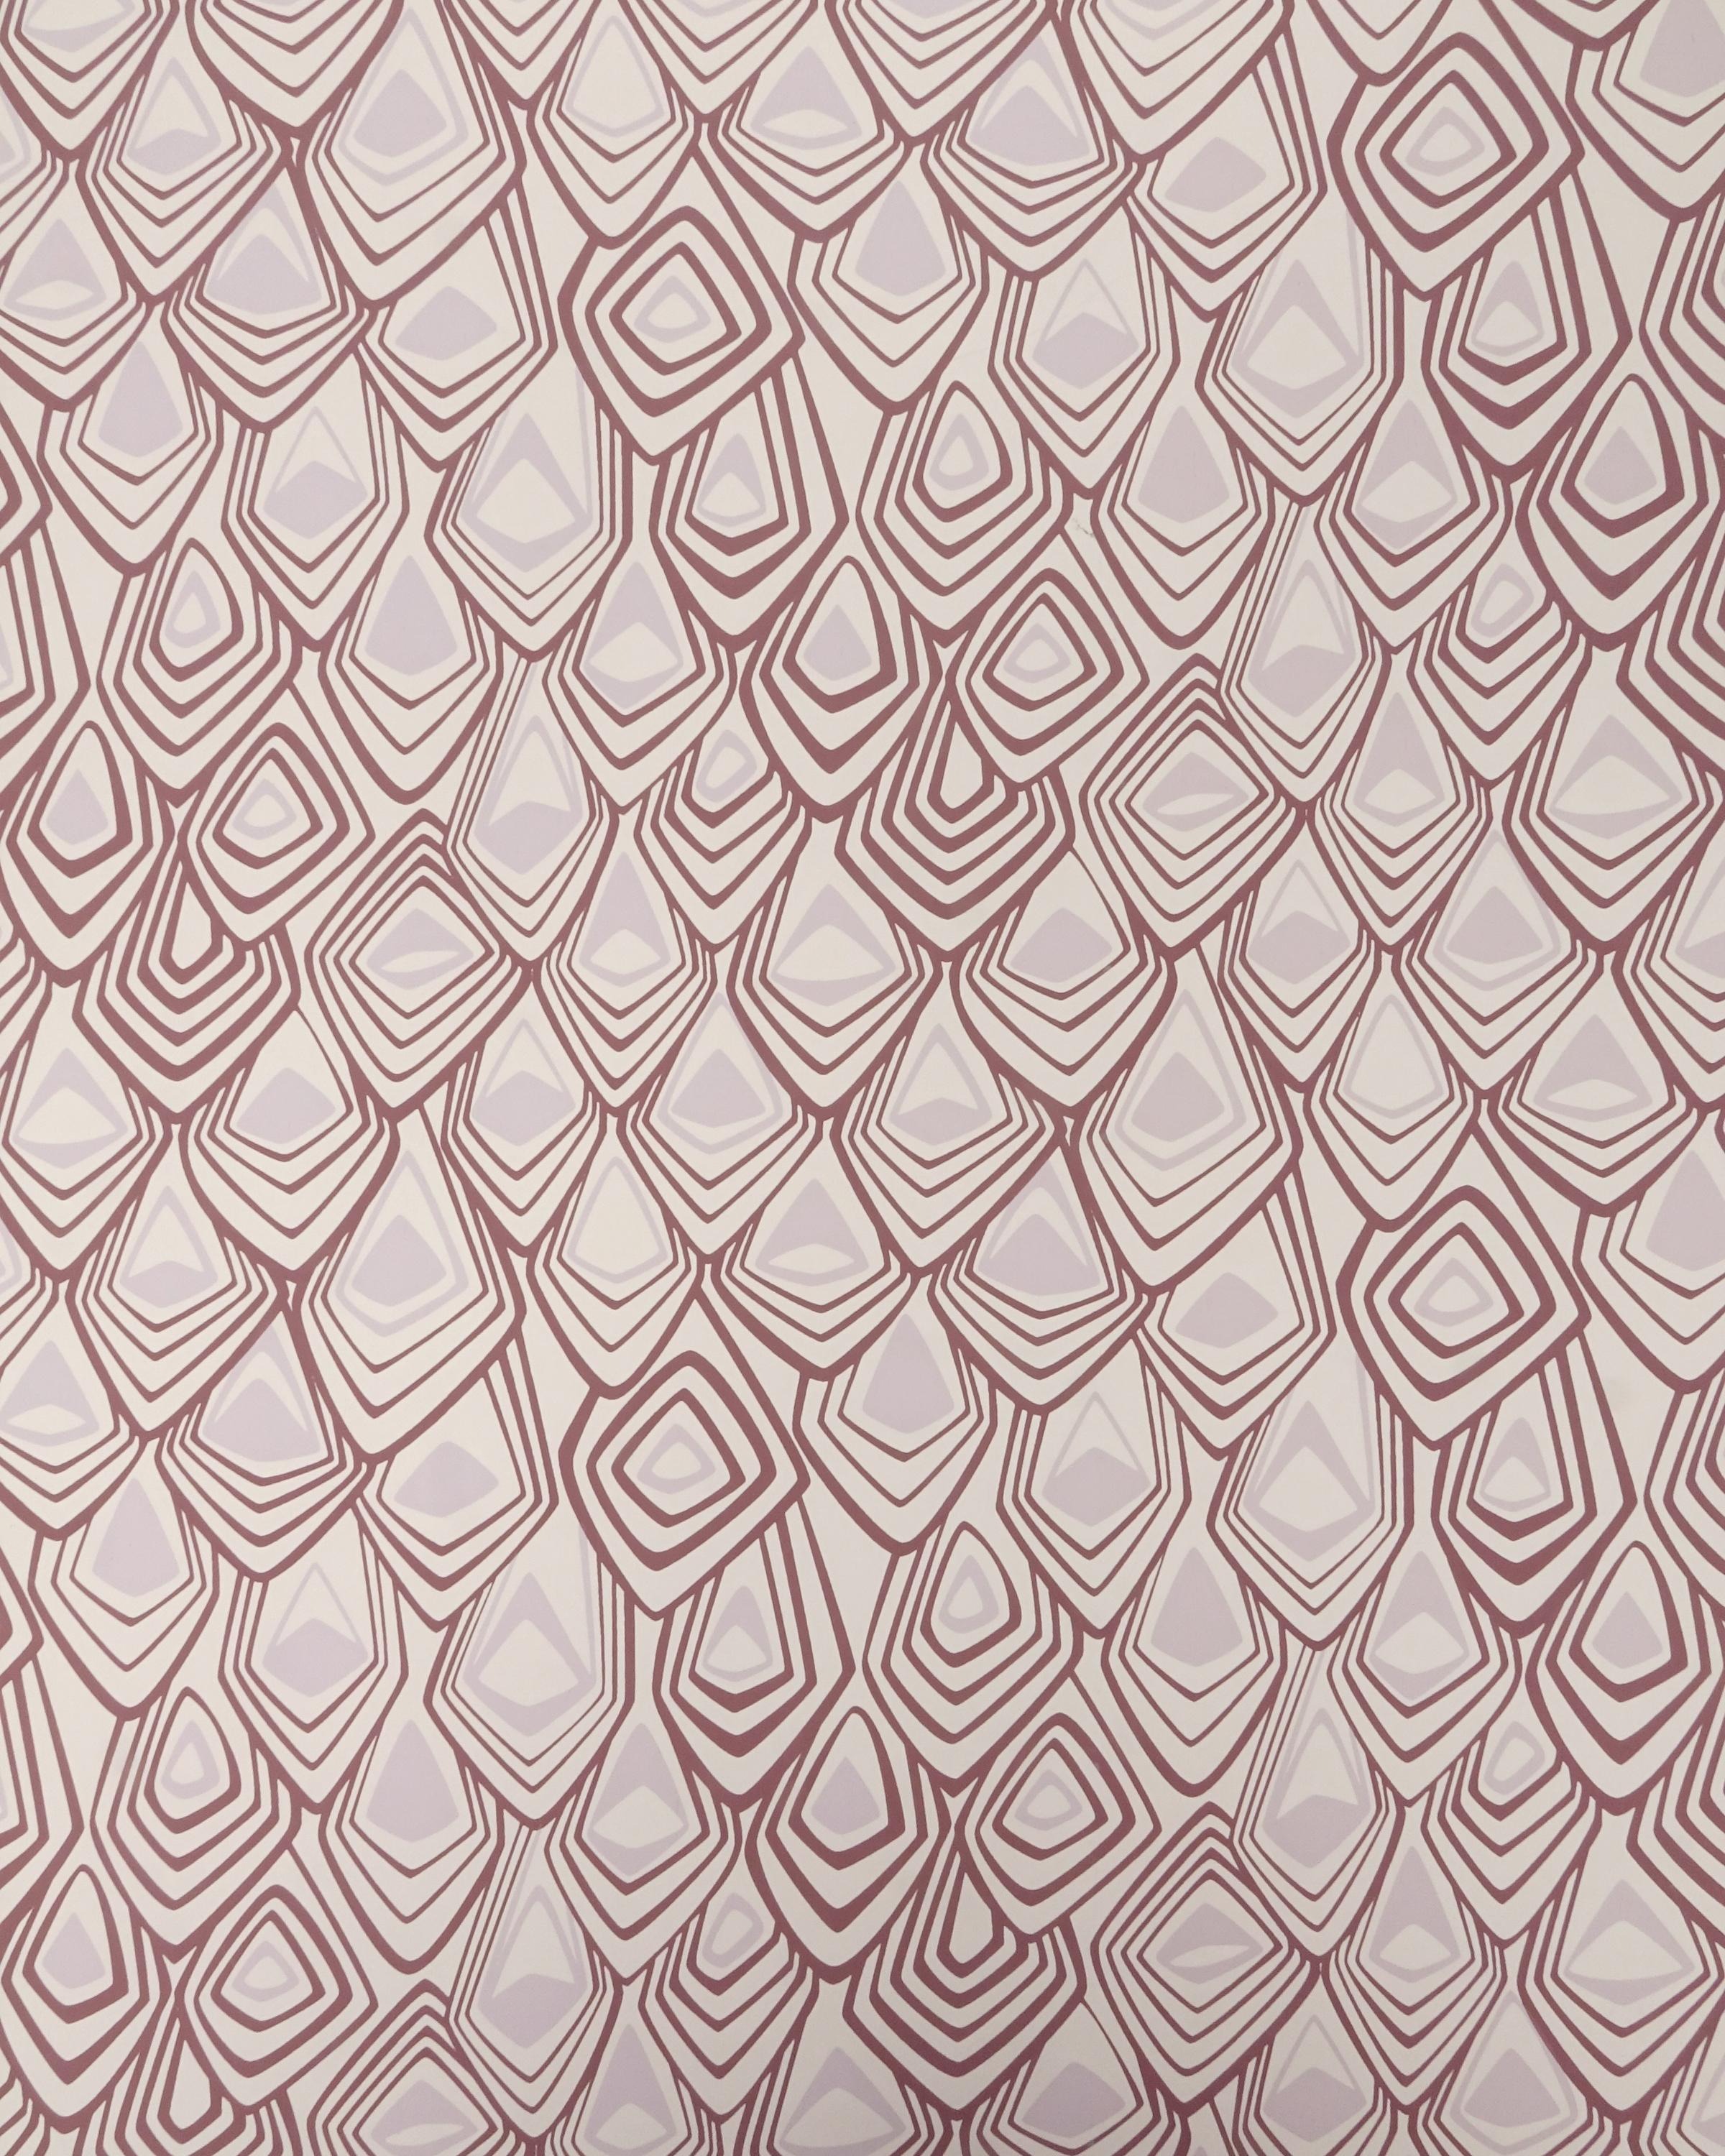 Michele Varian's Boho Diamond wallpaper is a modern design with a scale like pattern creating an undulating texture on your walls. The tone on tone dark lilac and clay on an off-white, crème background and add warmth to a room.

We stock 30 foot